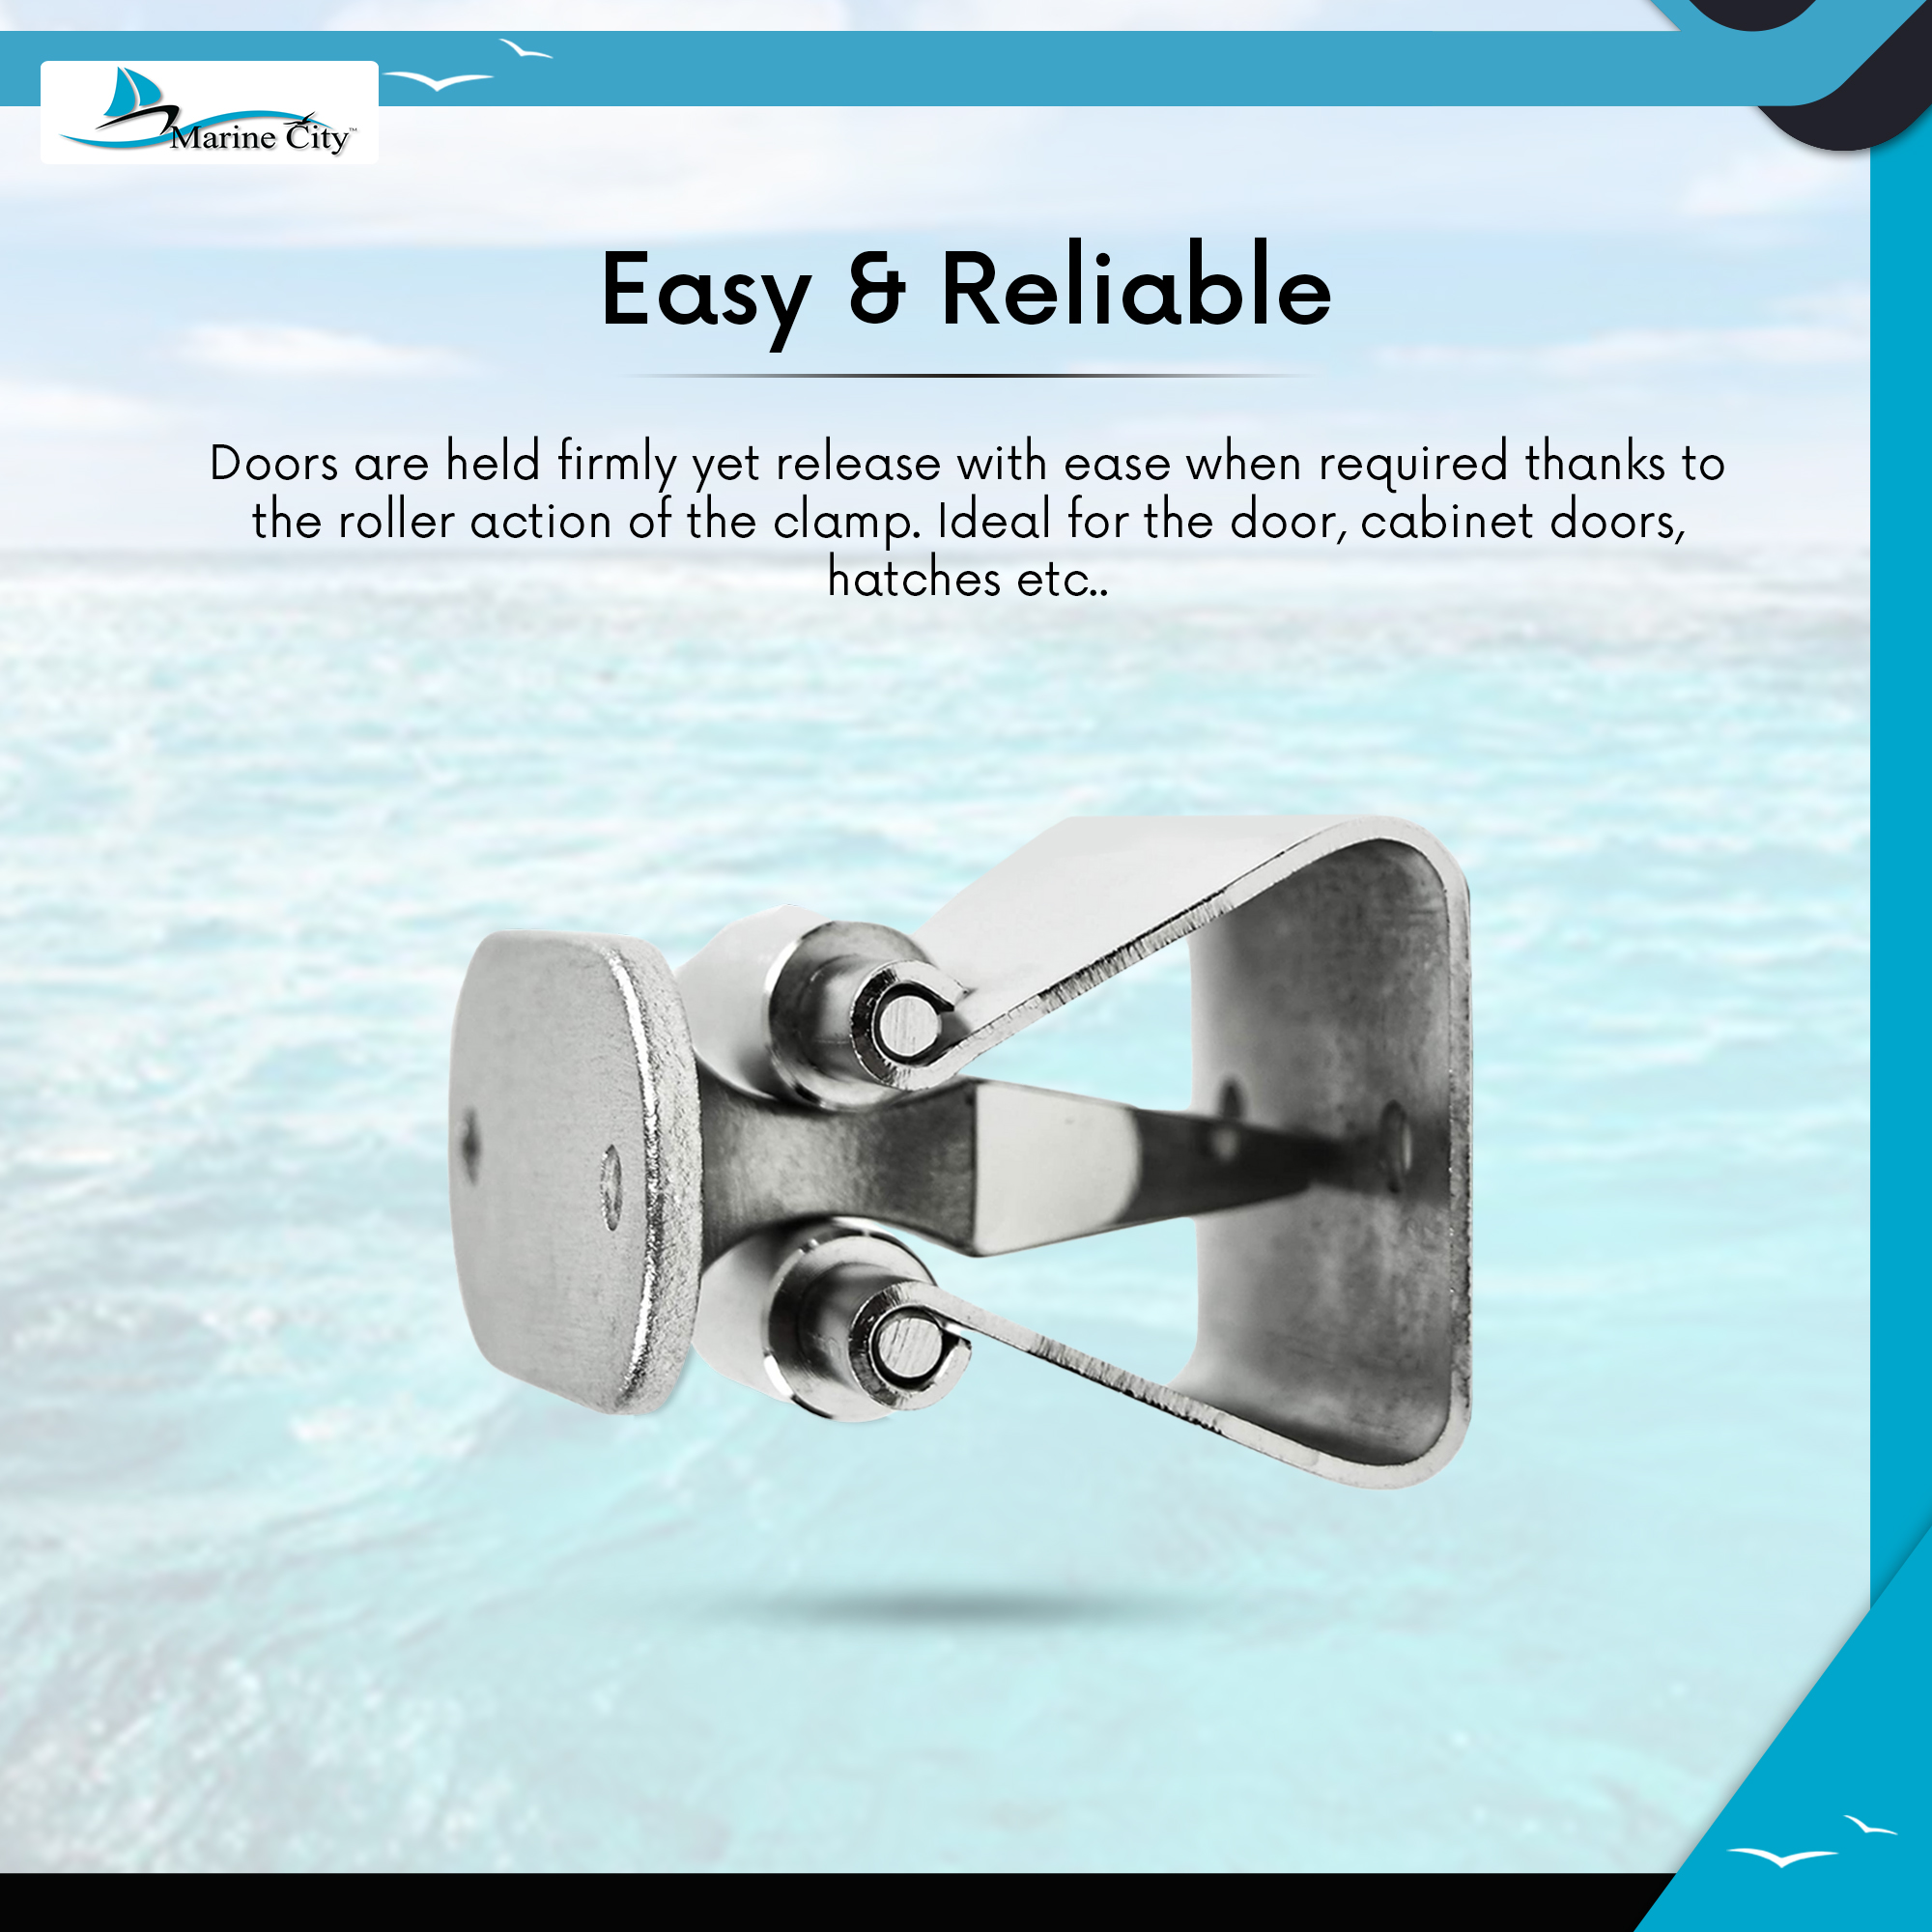 Marine City Stainless Steel Modern Hardware Door Soft Stopper Catch and Holder for RV Boat Marine Accessories (Height 1-5'8")